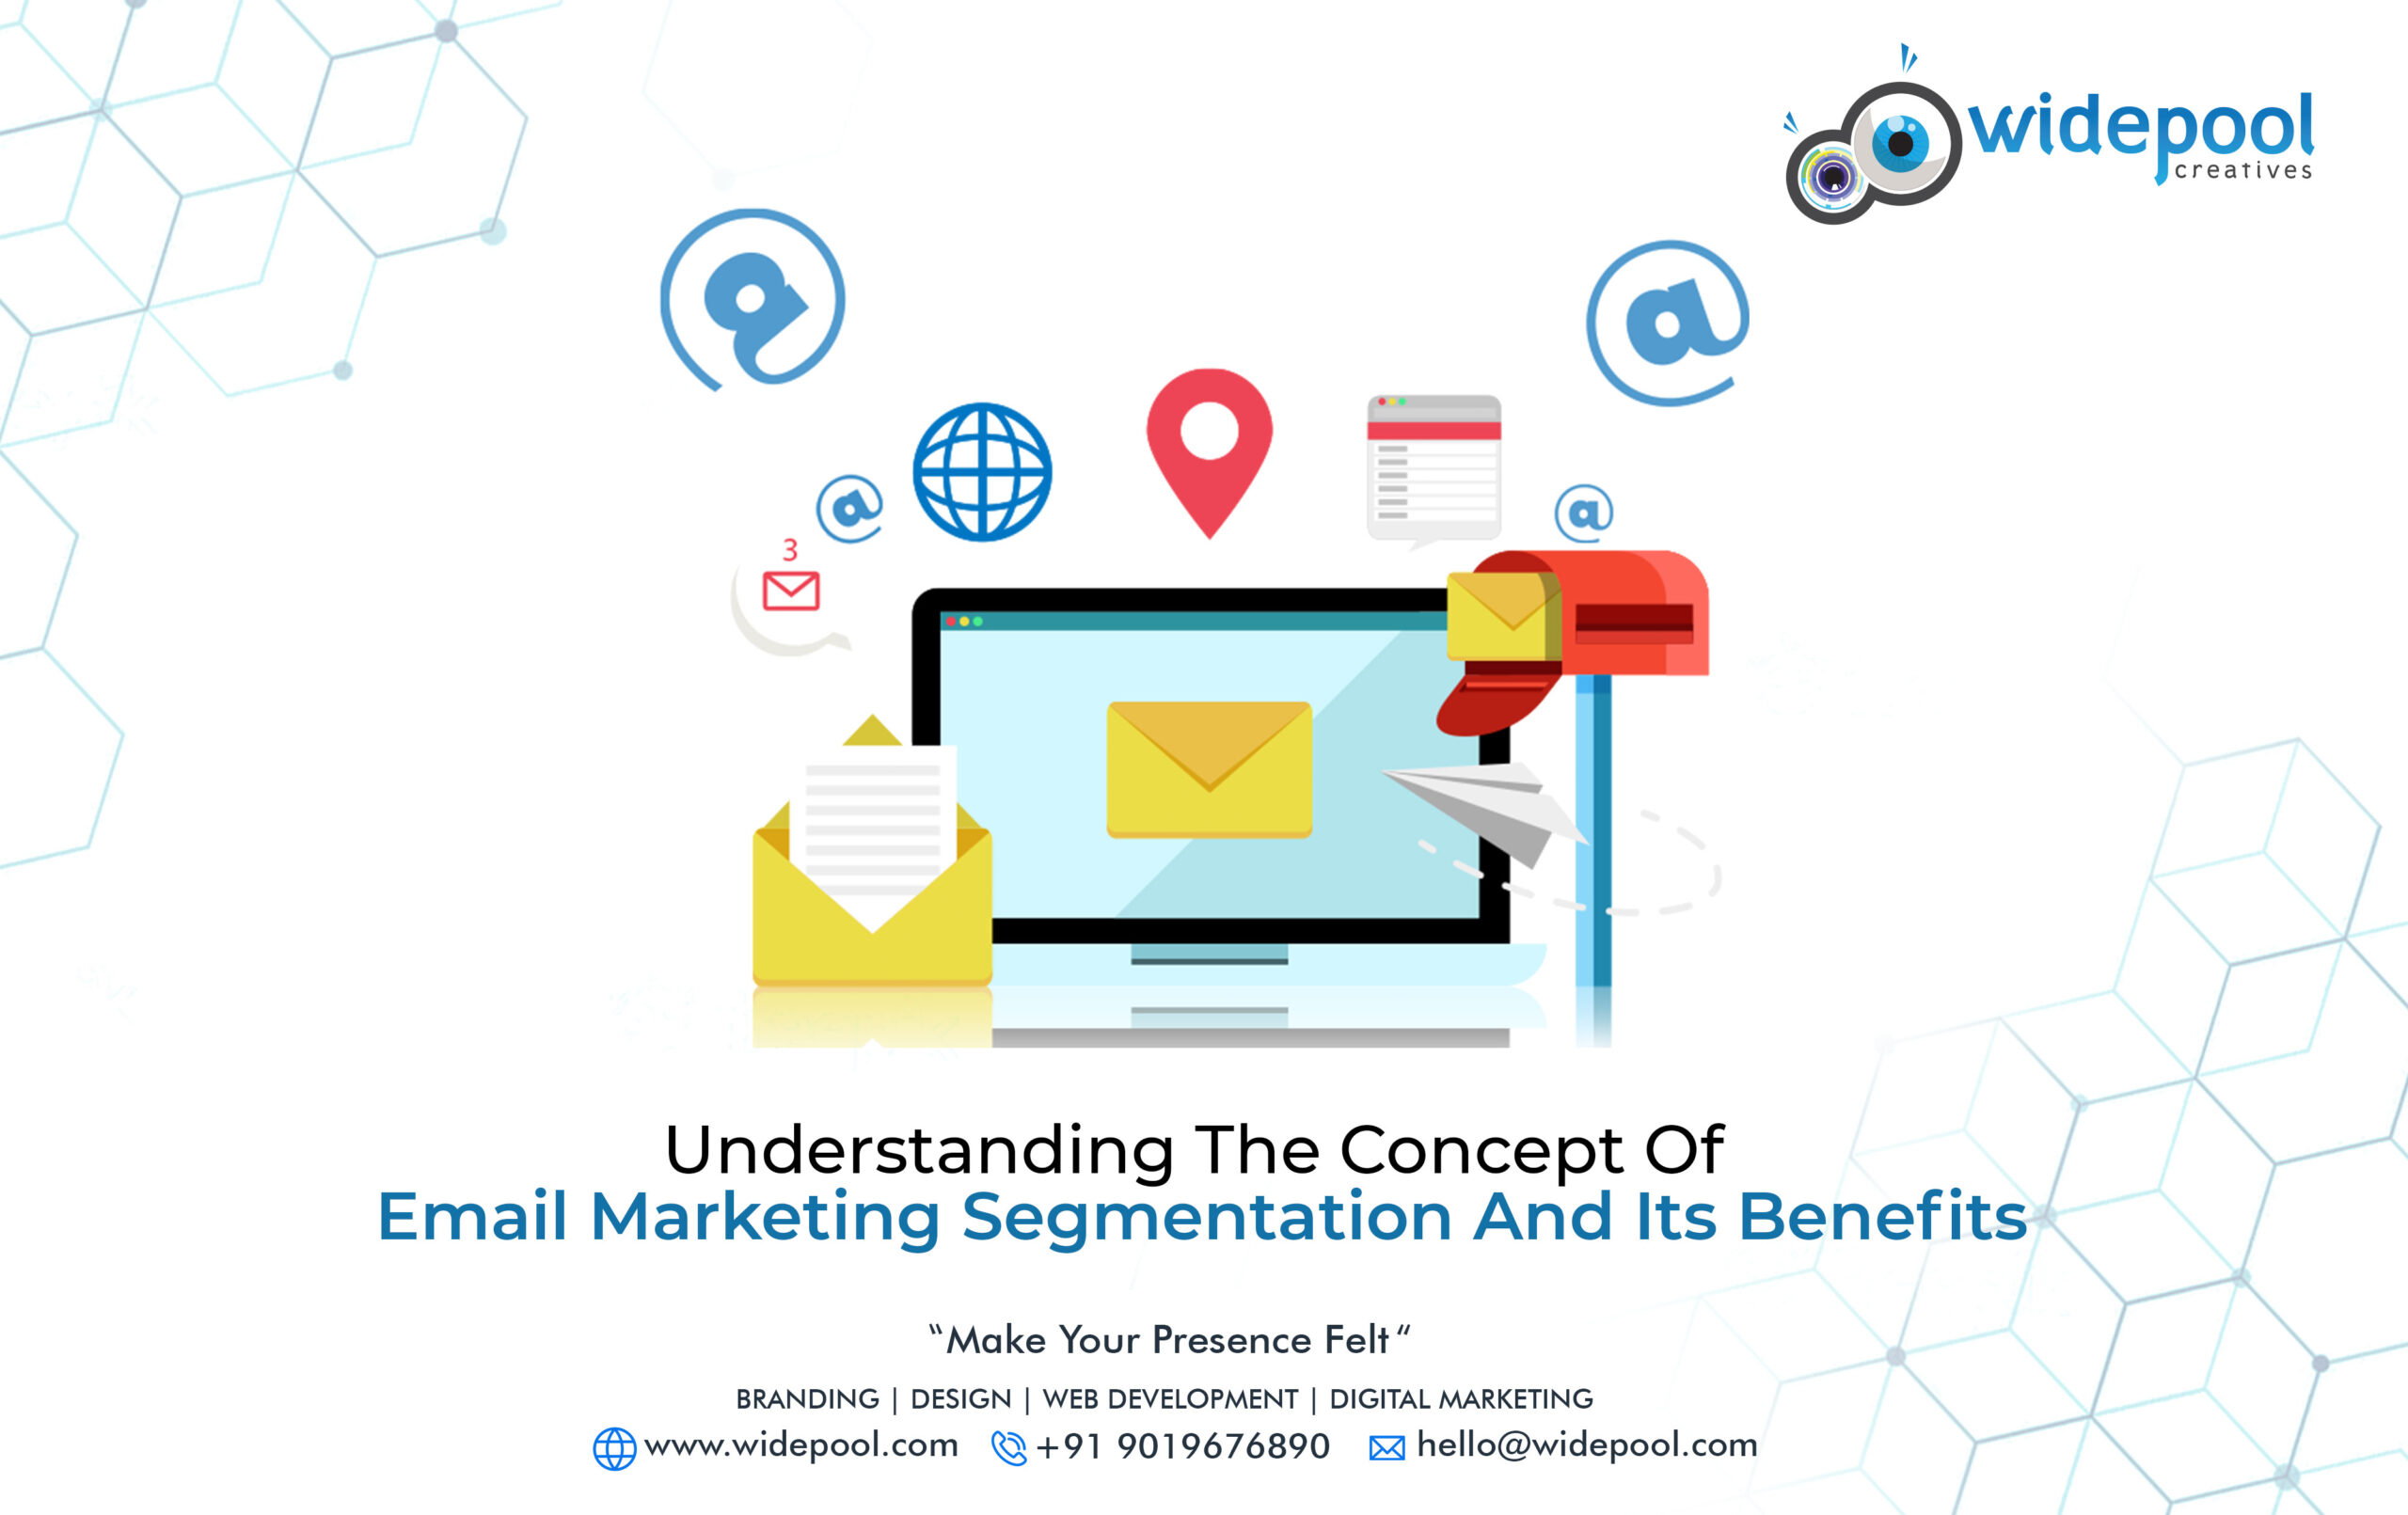 Understanding the Concept of Email Marketing Segmentation and Its Benefits